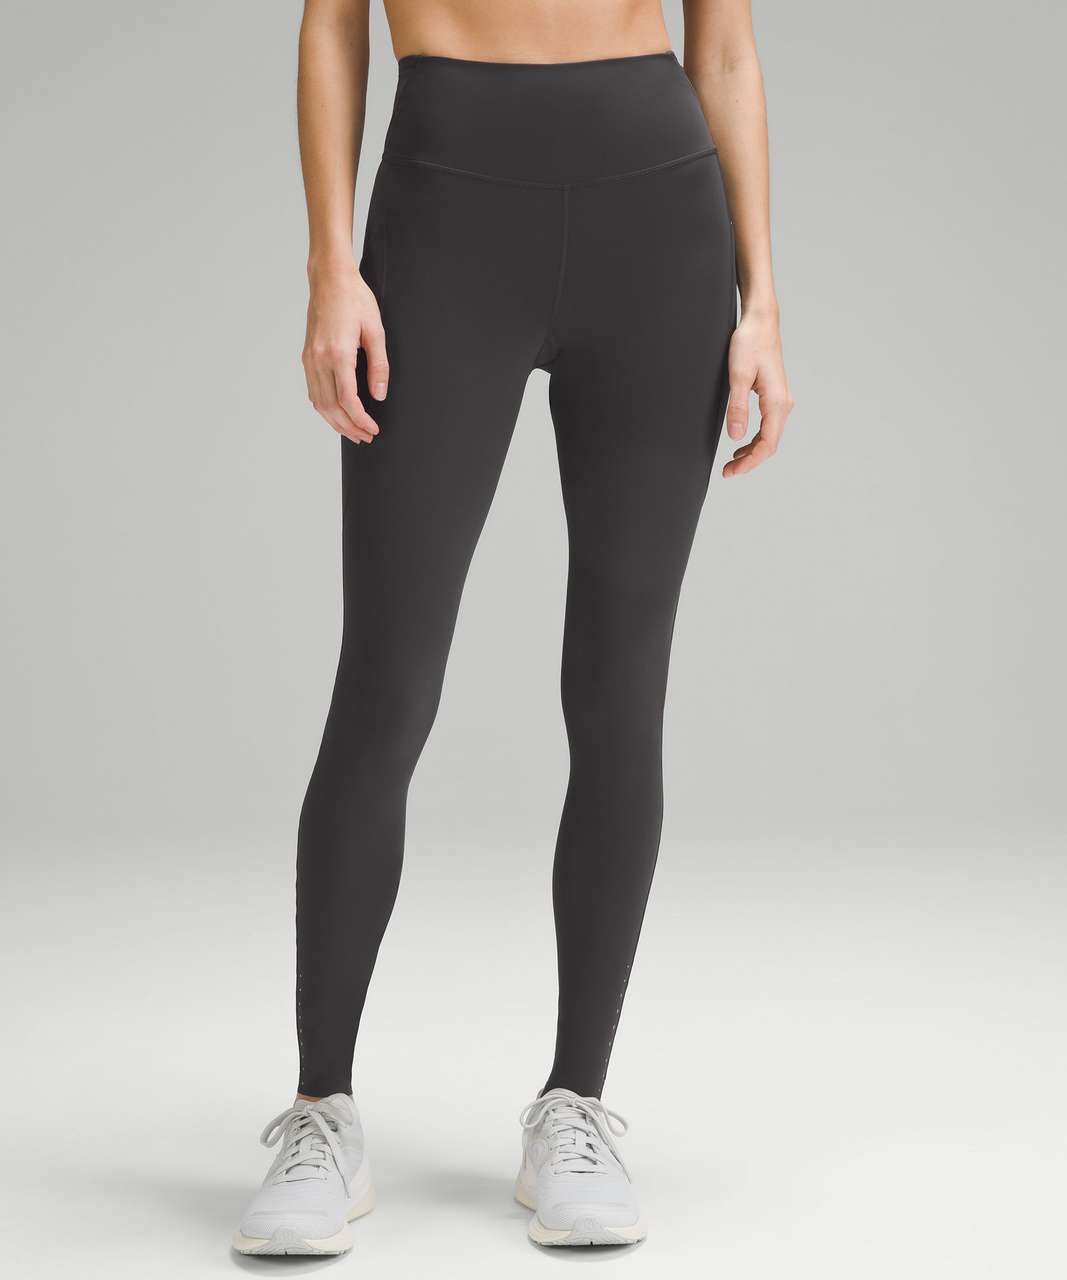 Lululemon Fast and Free High-Rise Tight 28" *Pockets - Graphite Grey